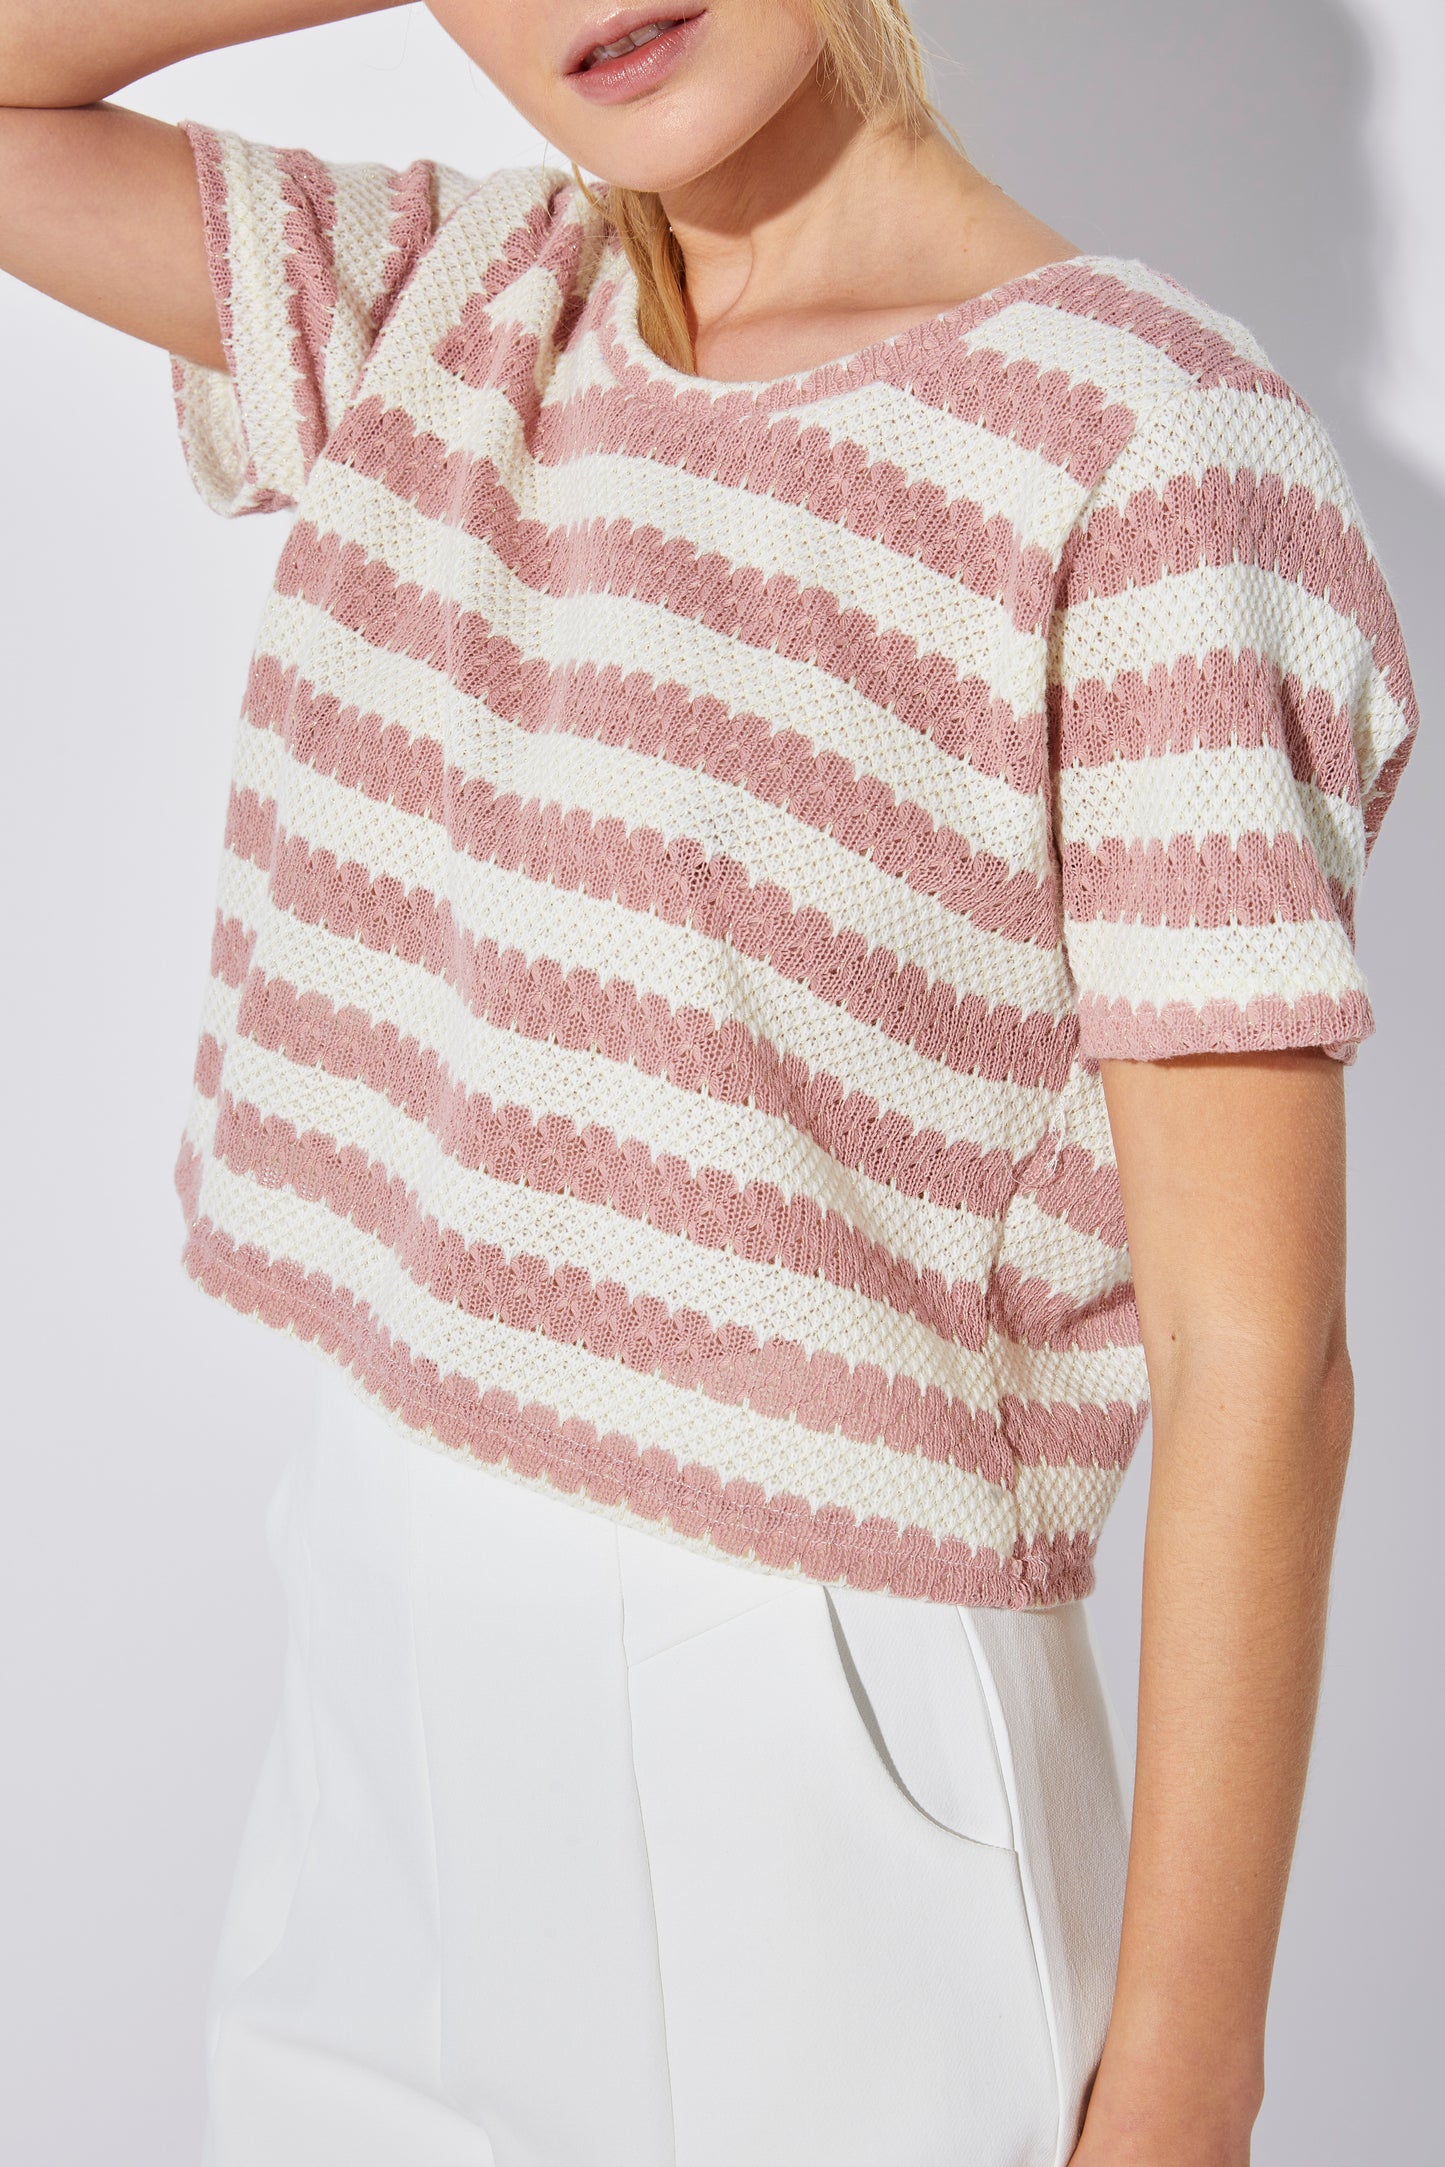 PINK STRIPED COTTON TOP